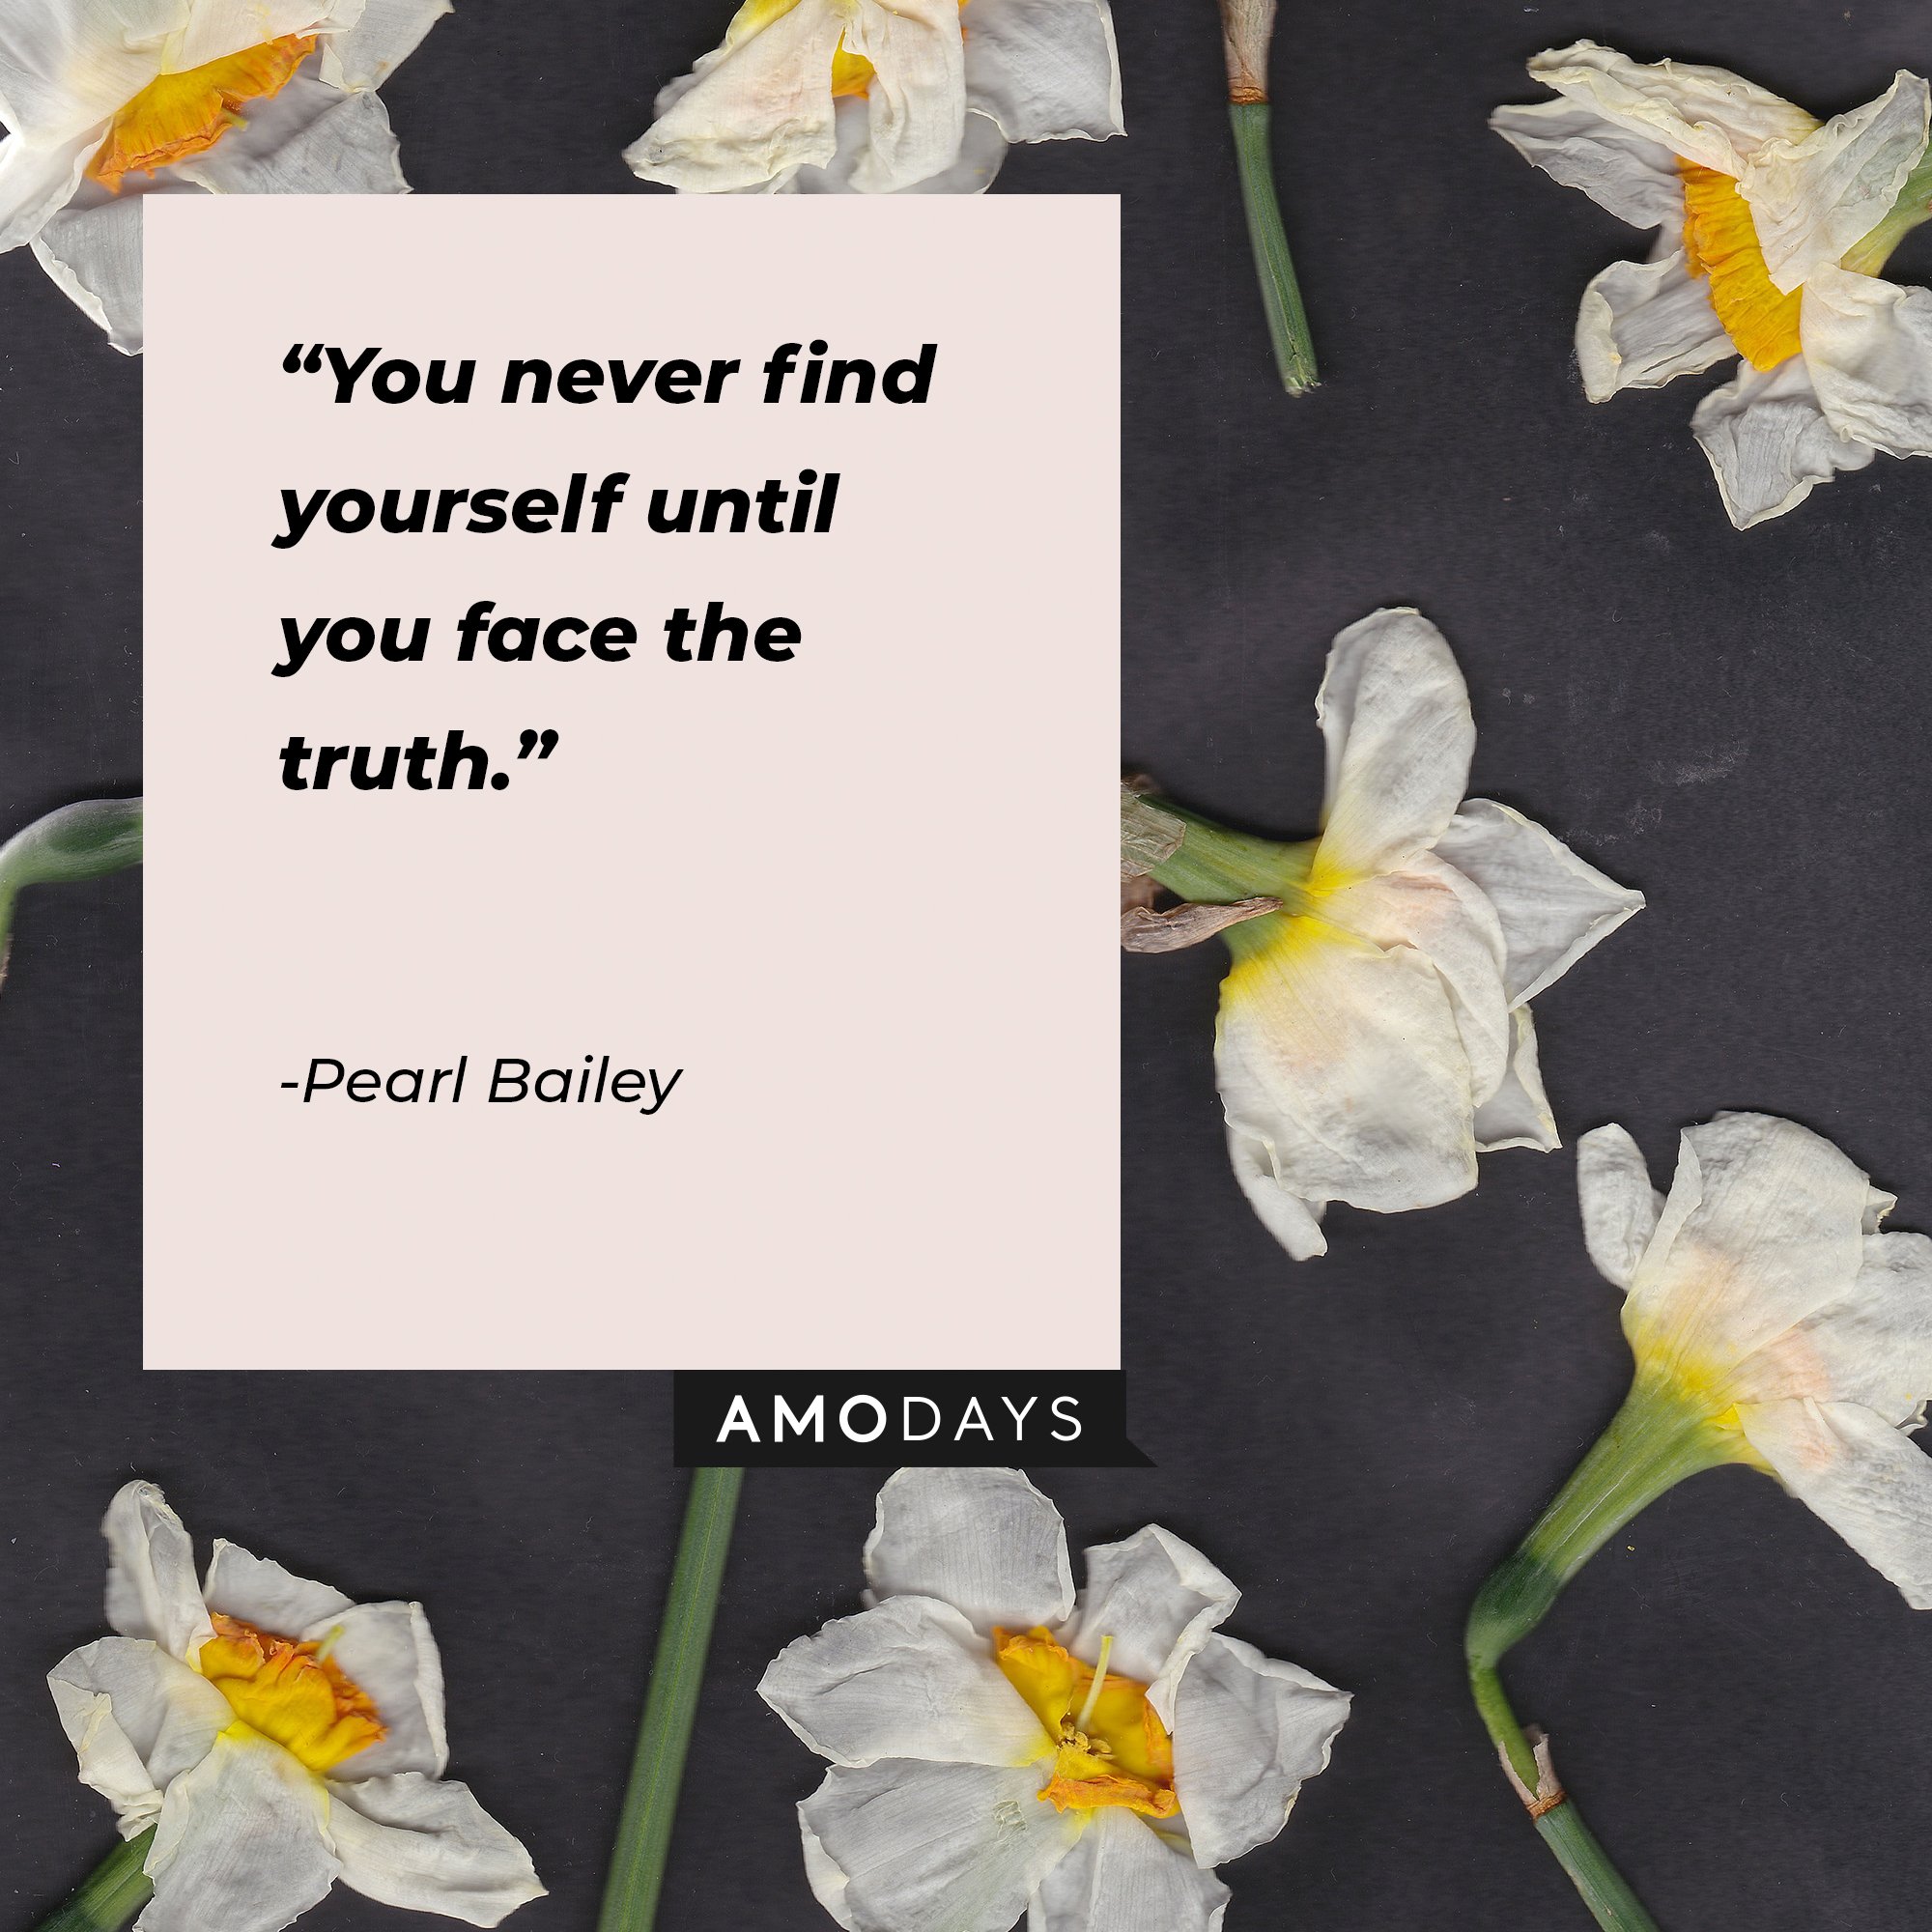 Pearl Bailey's quote:  “You never find yourself until you face the truth." | Image: AmoDays